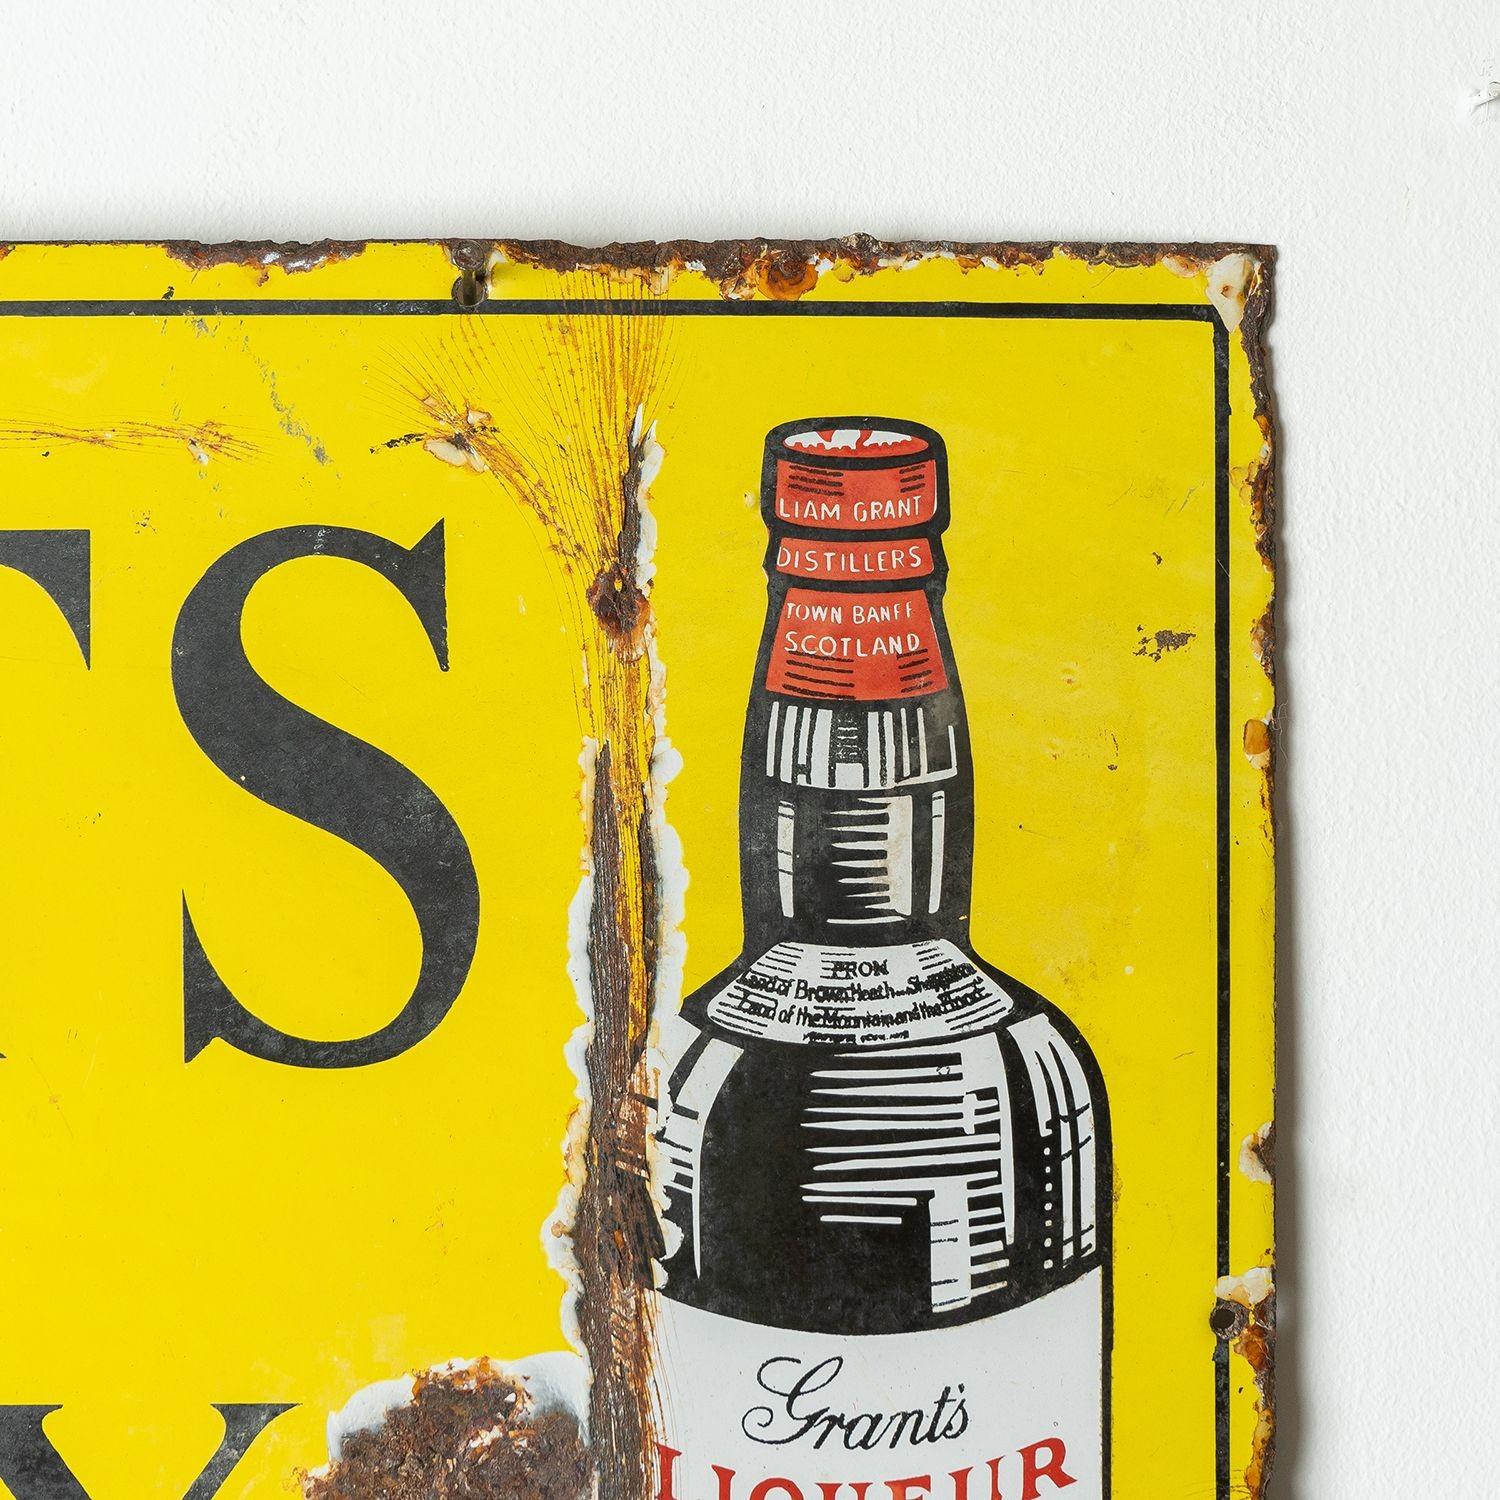 Vintage Grants Scotch Whisky Enamel Advertising Sign, Early 20th Century Whiskey In Good Condition For Sale In Bristol, GB